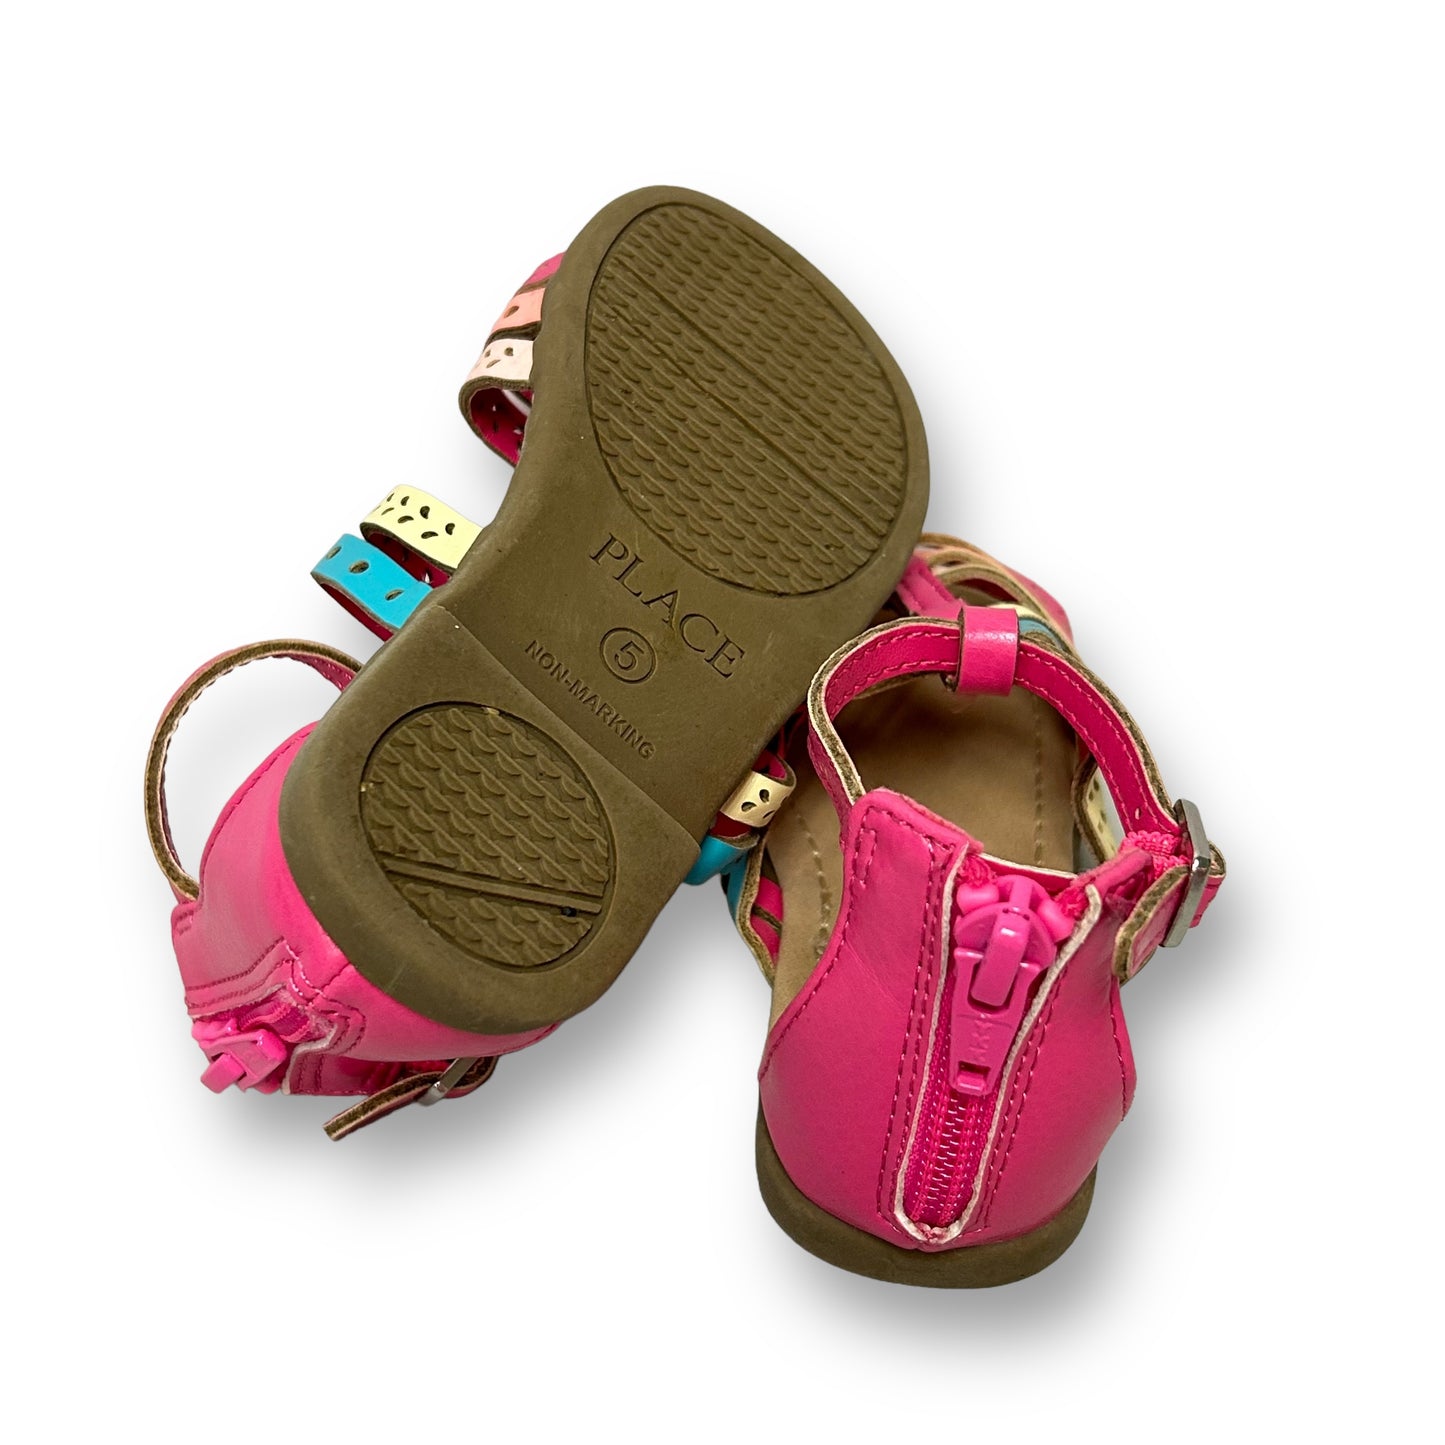 Children's Place Toddler Girl Size 5 Multi-Color Strappy Zipper-Back Sandals